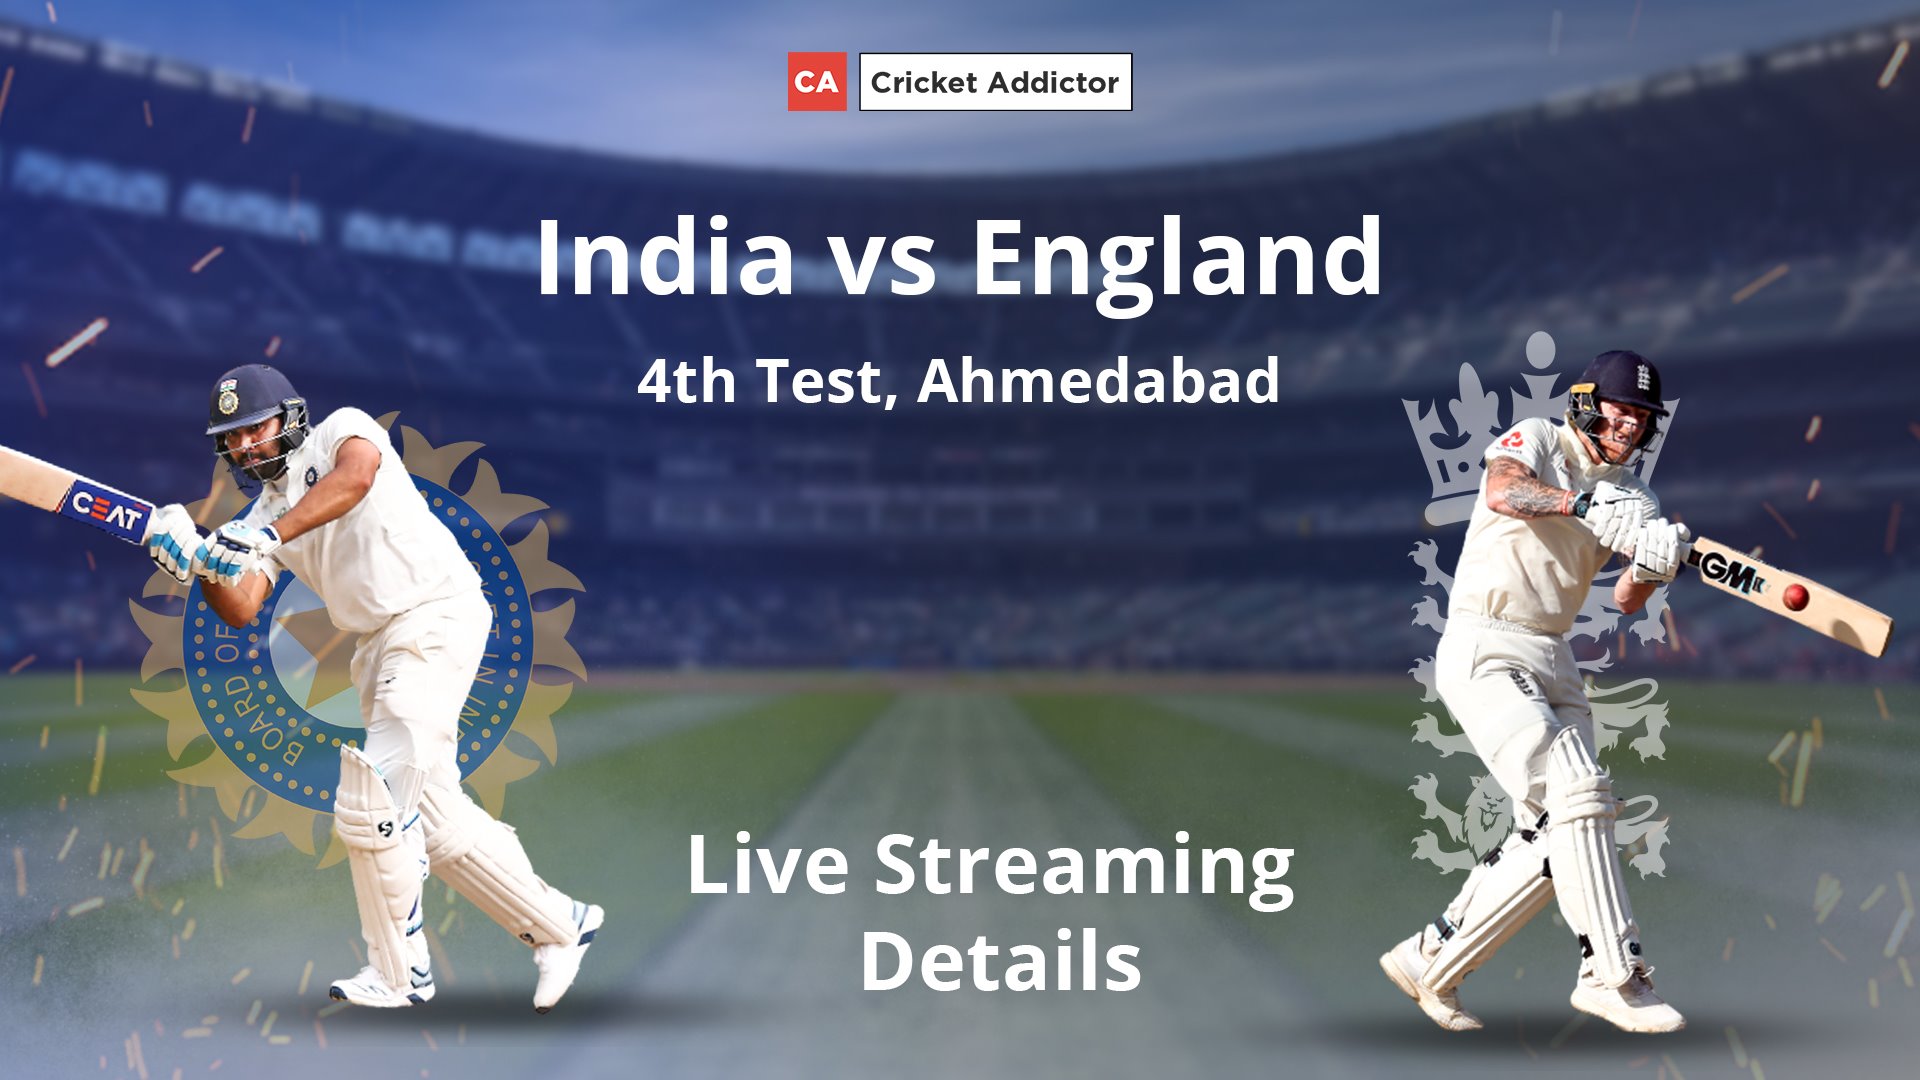 India vs England 2021, 4th Test: When And Where To Watch, Live Streaming Details